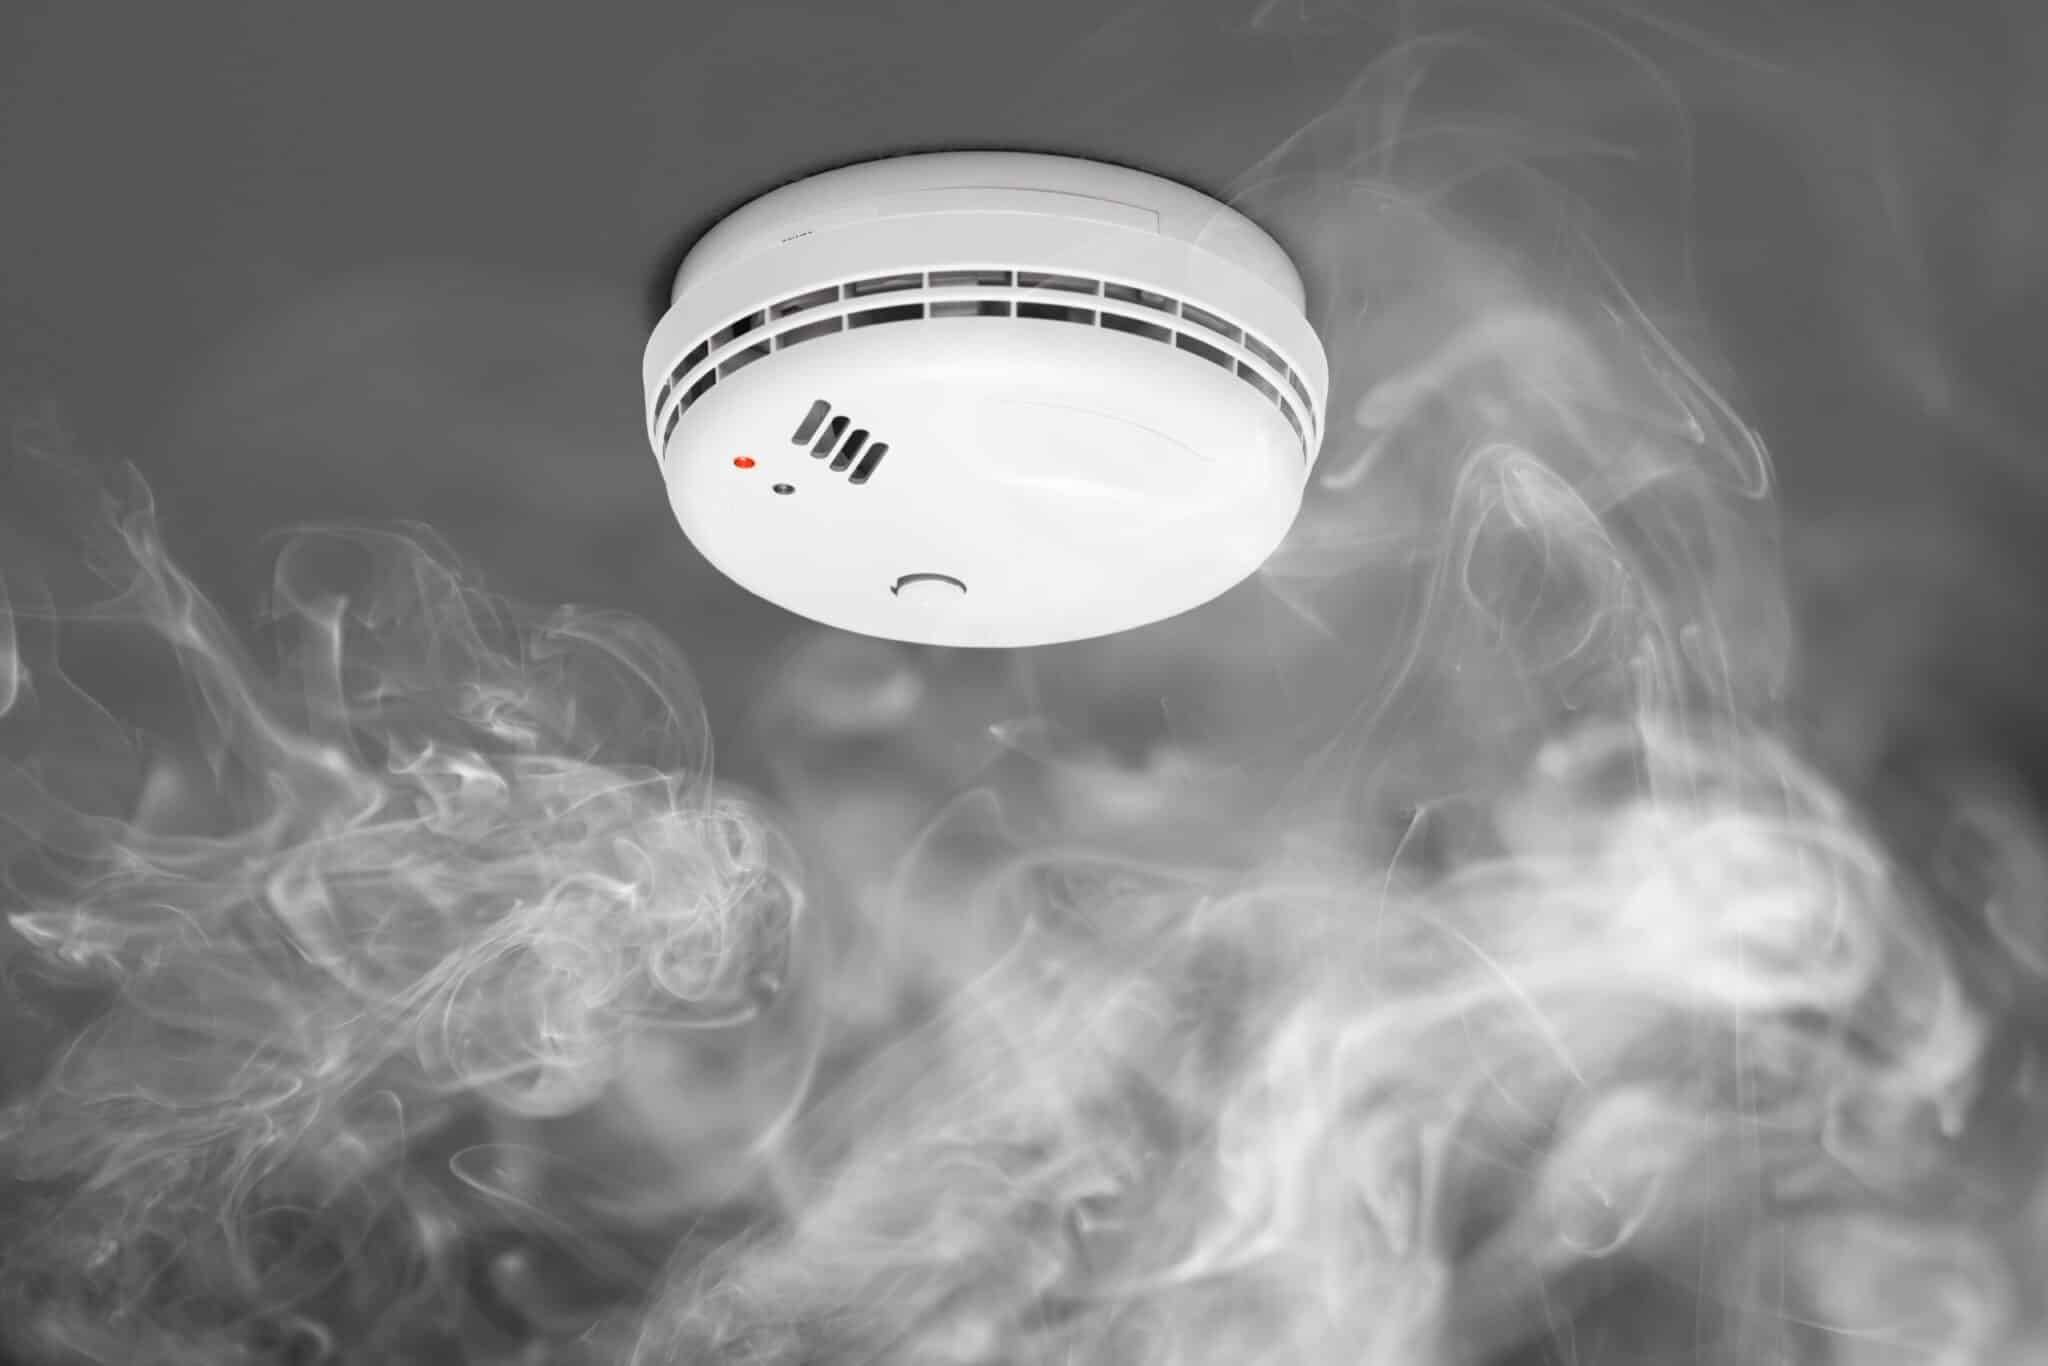 Smoke and Carbon Monoxide alarm rules to be Updated